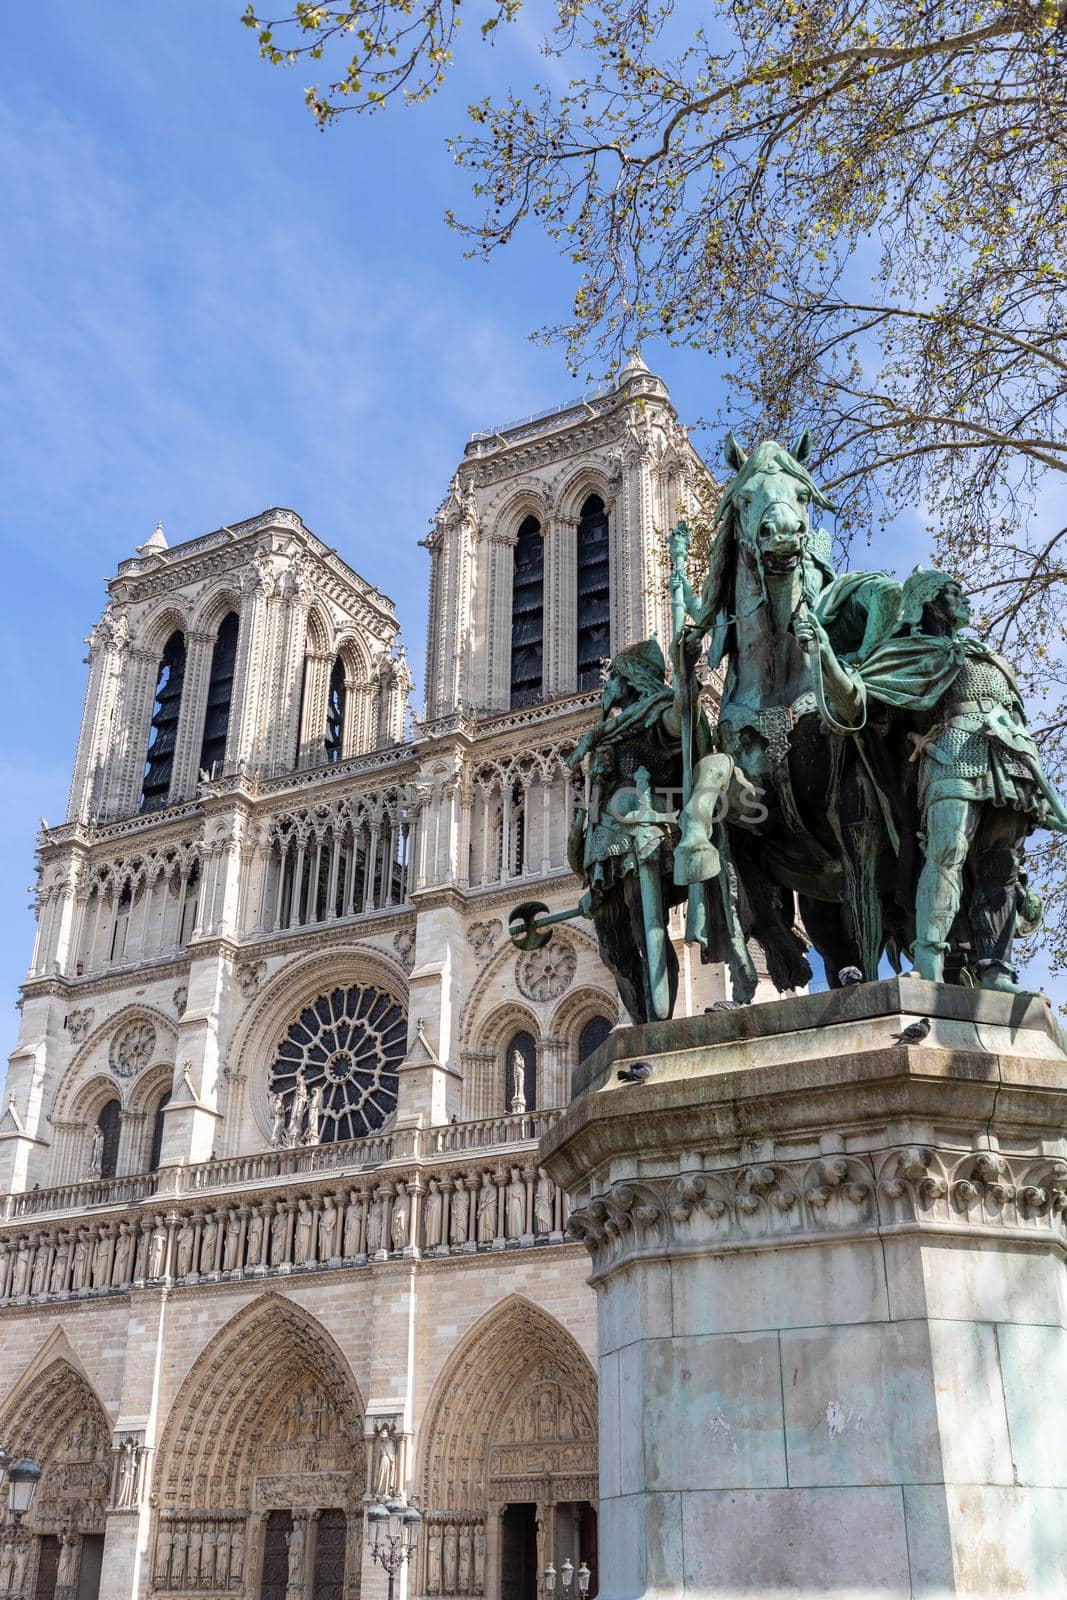 Statue of Charlemagne and cathedral Notre-Dame, Paris by reinerc